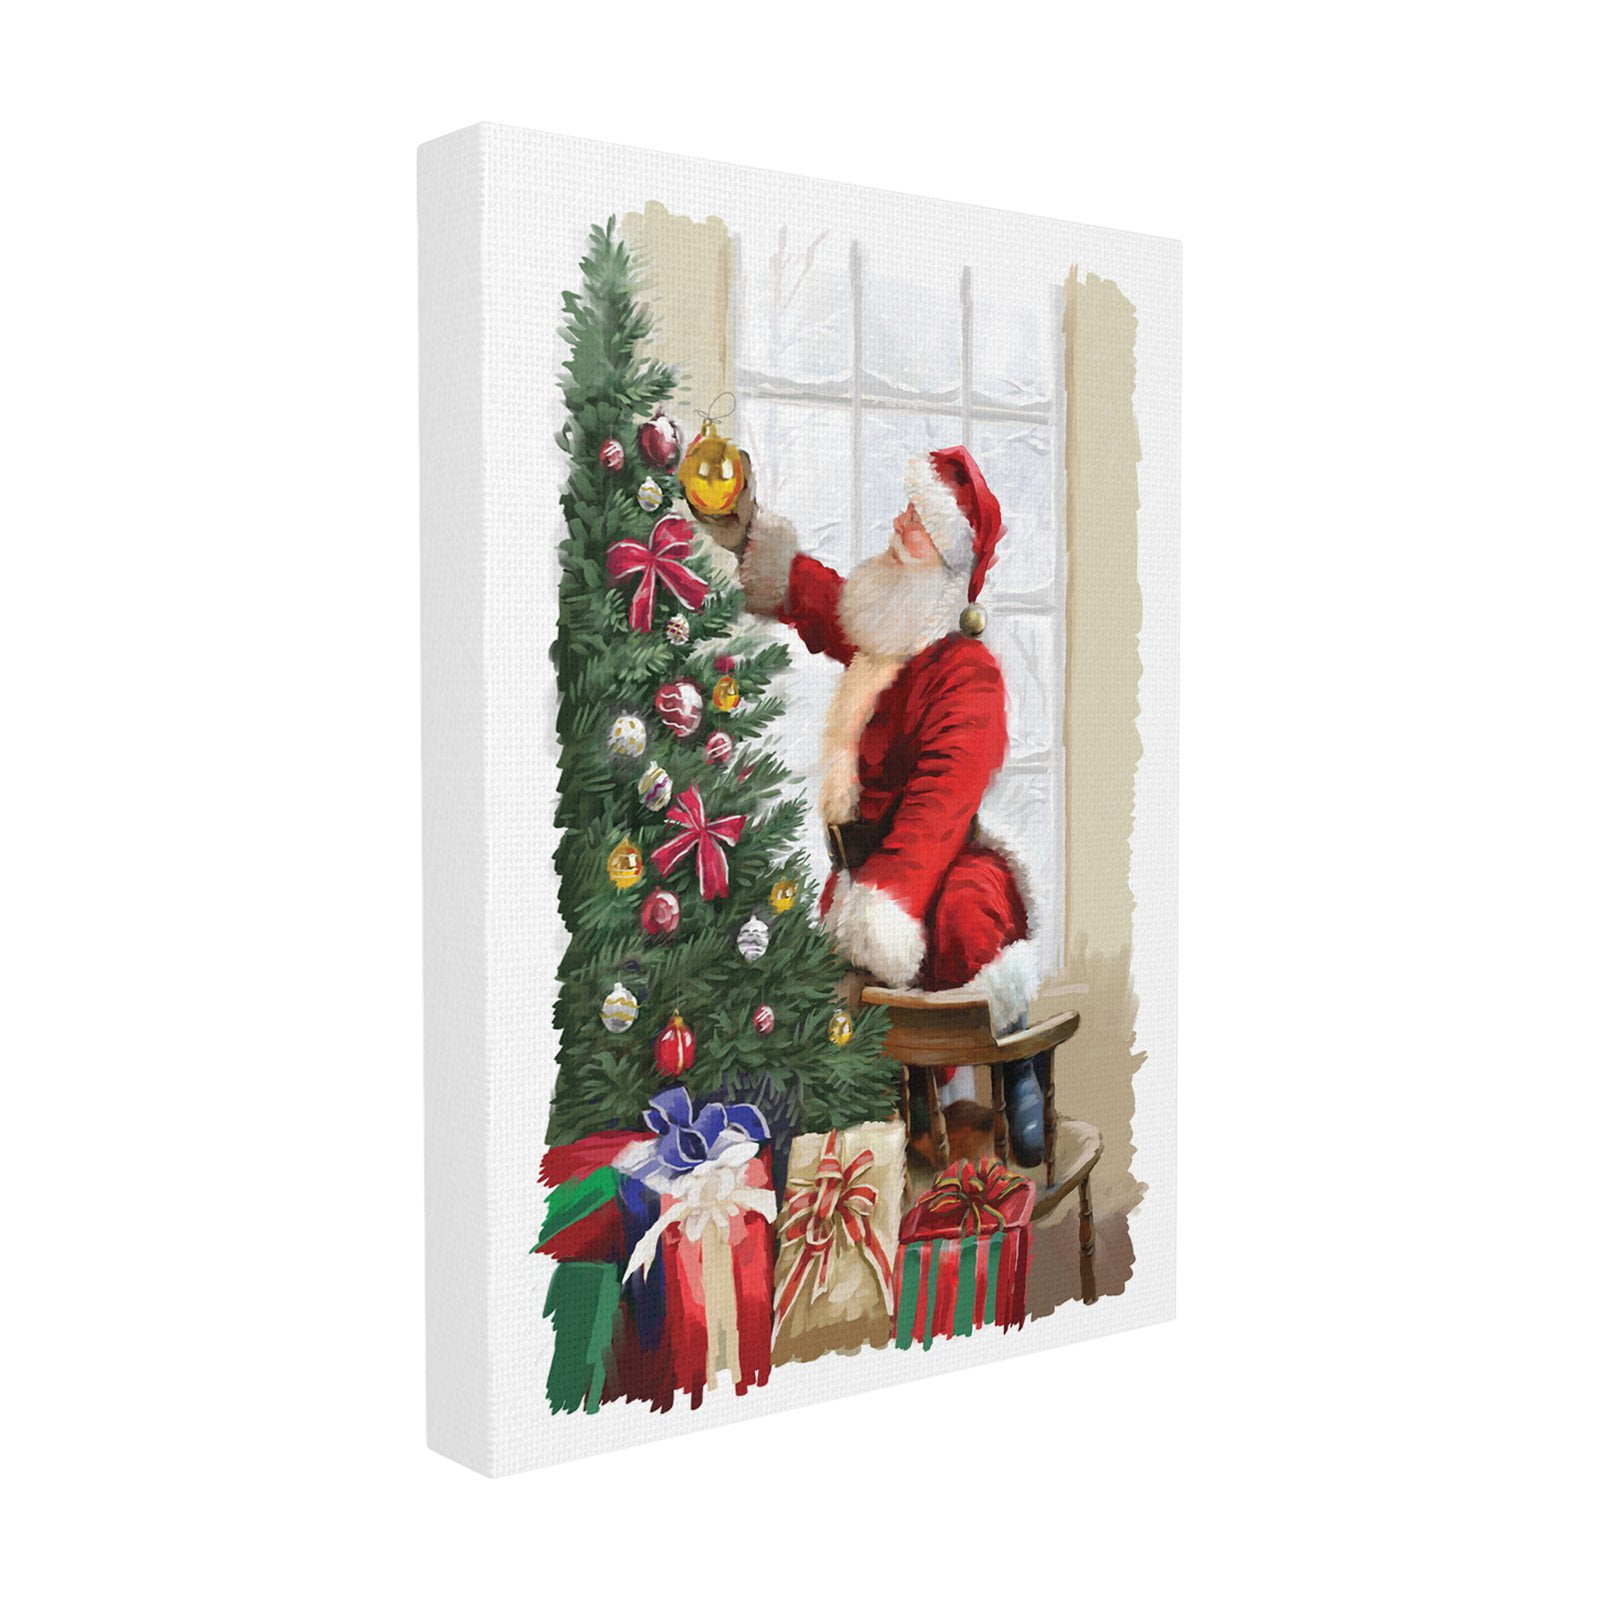 The Stupell Home Decor Collection Holiday Santa Decorating Christmas ...